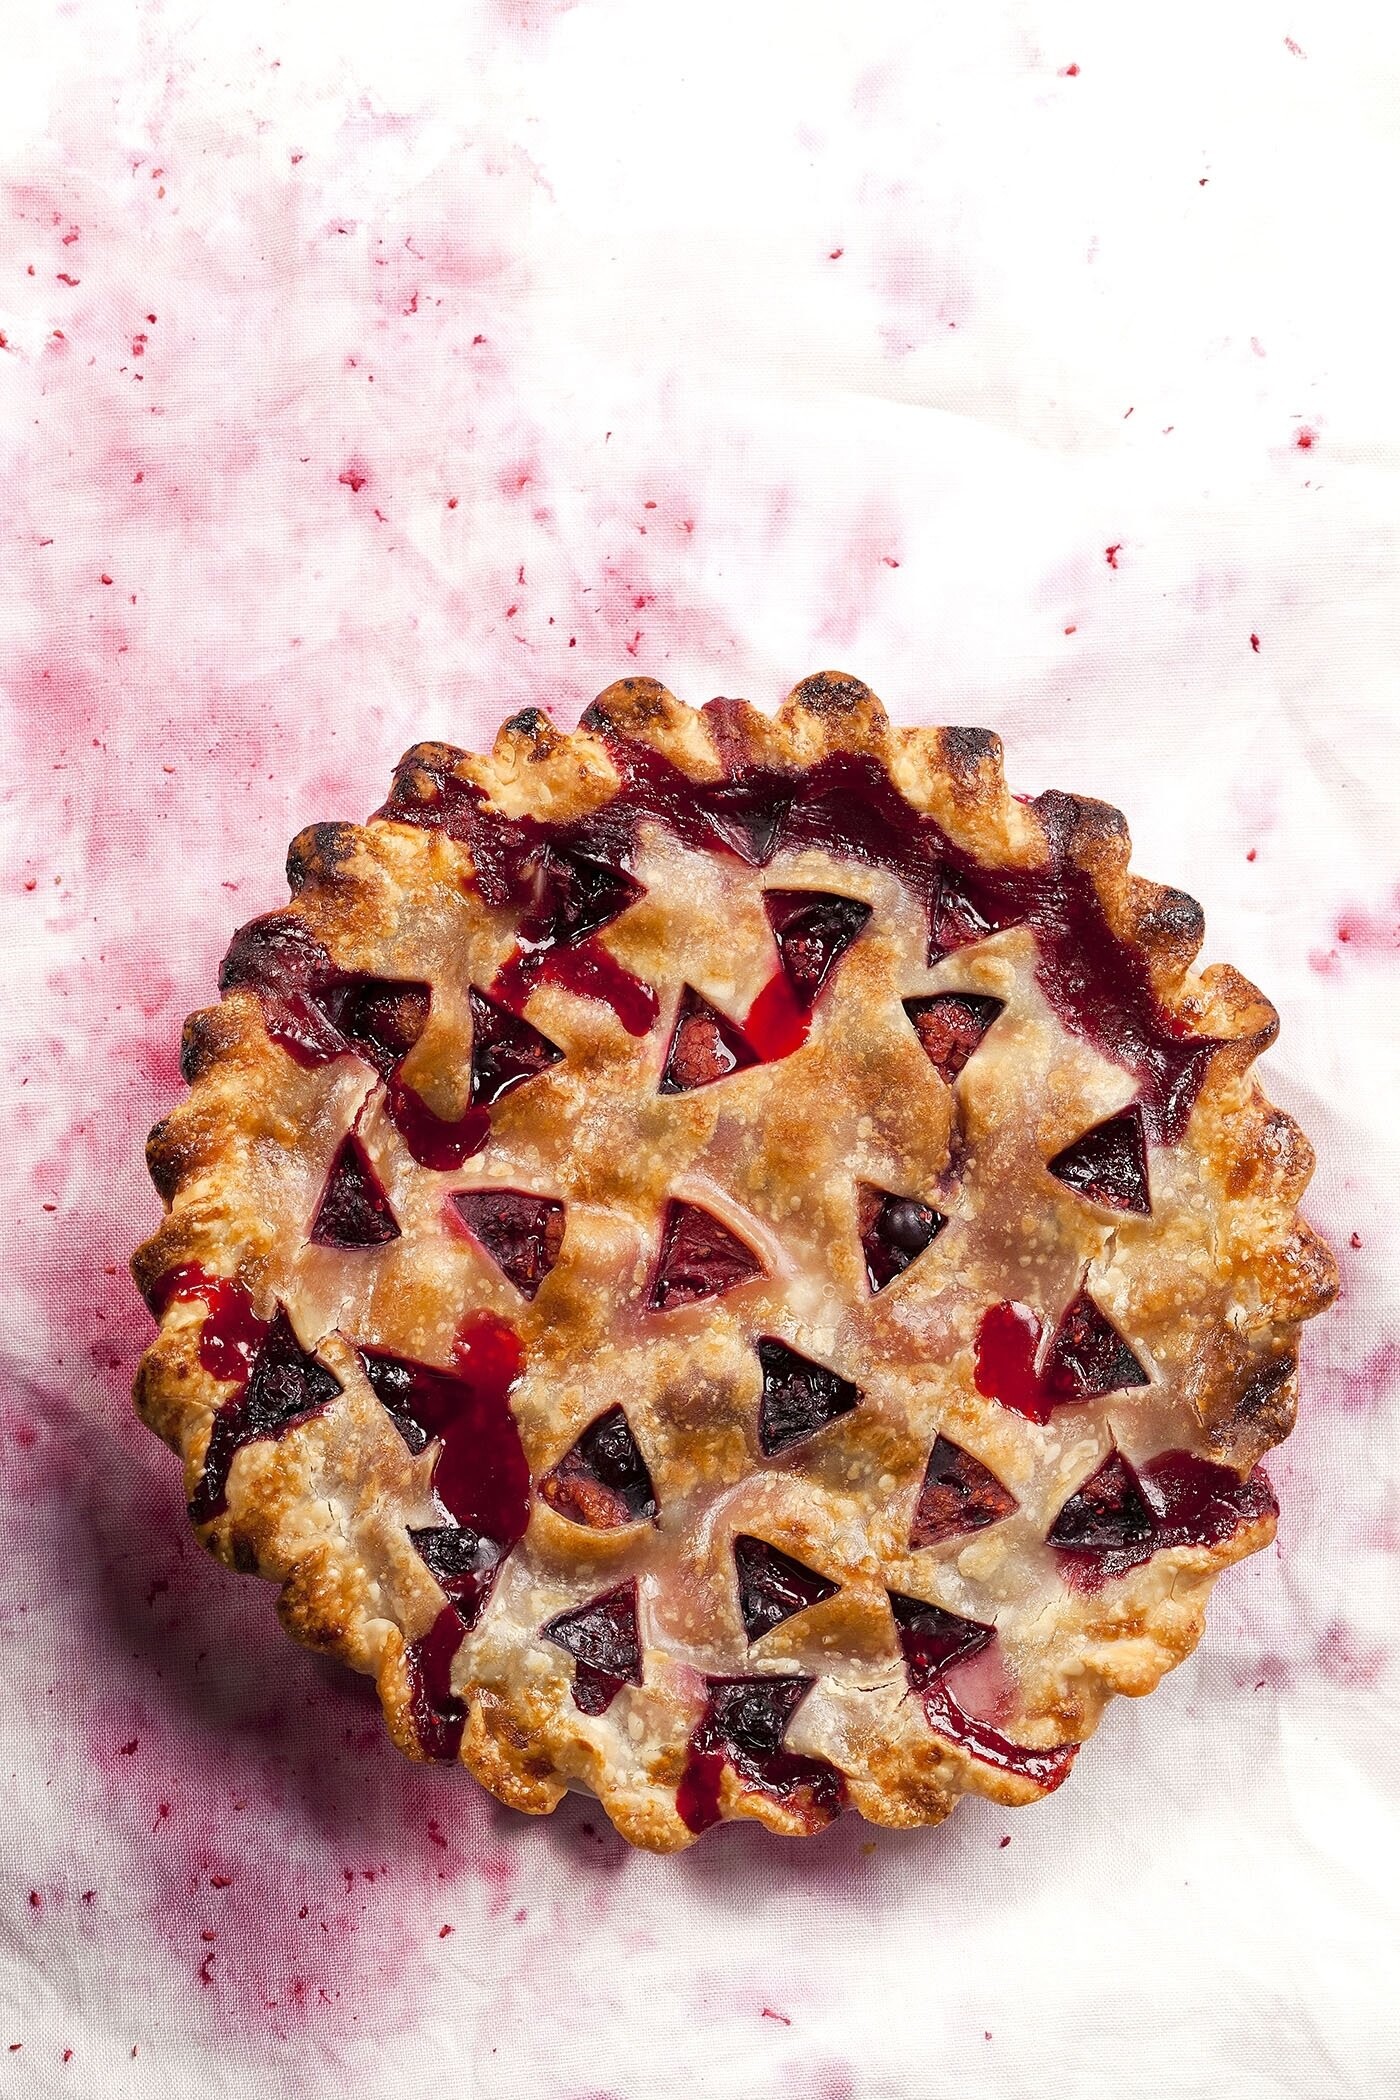 This Berry Pie was photographed out of season for a summer publication. A challenge in Alberta Canada! I made the cloth by staining with berry and beet juice. I love collaborating with food stylists who say. “Can you do this?” It’s teamwork that I love.